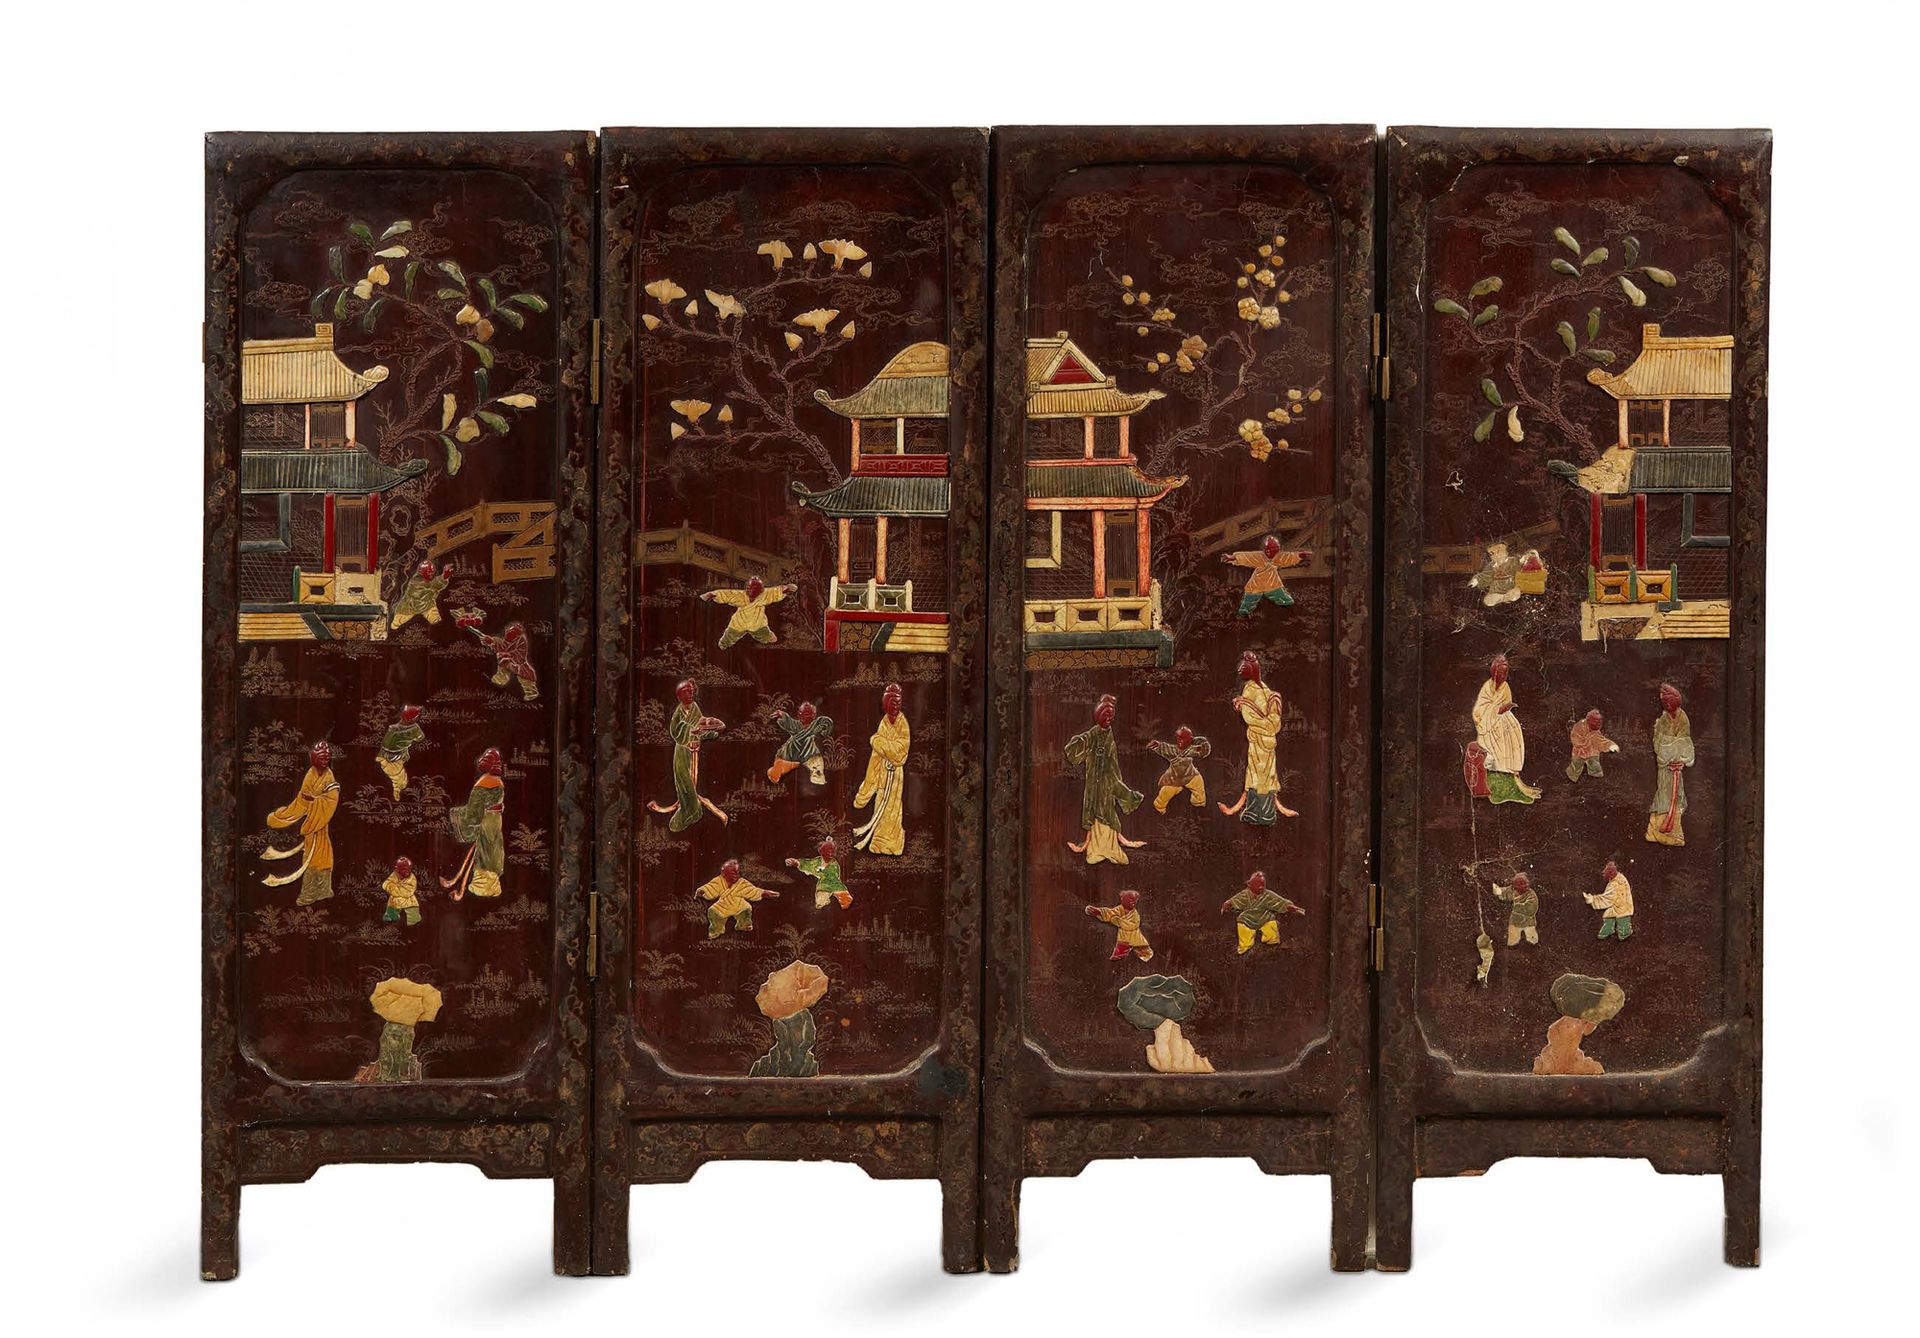 CHINE Four-leaf screen inlaid with hard stone. Around 1900.
H. : 91 cm